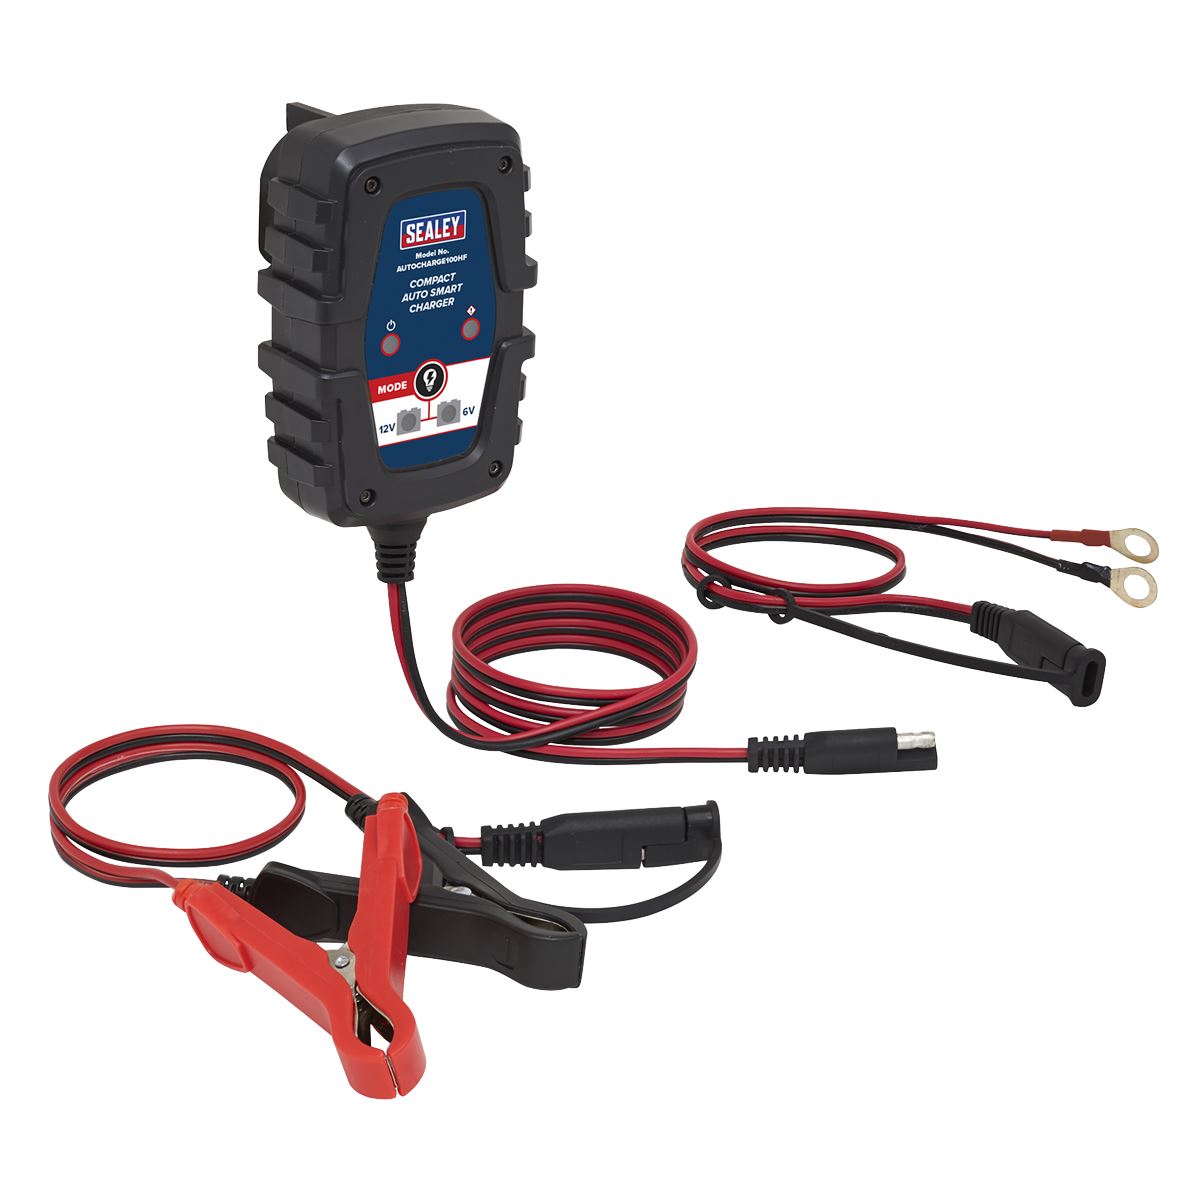 Sealey Compact Auto Smart Battery Charger 1A 6V/12V Dual Voltage